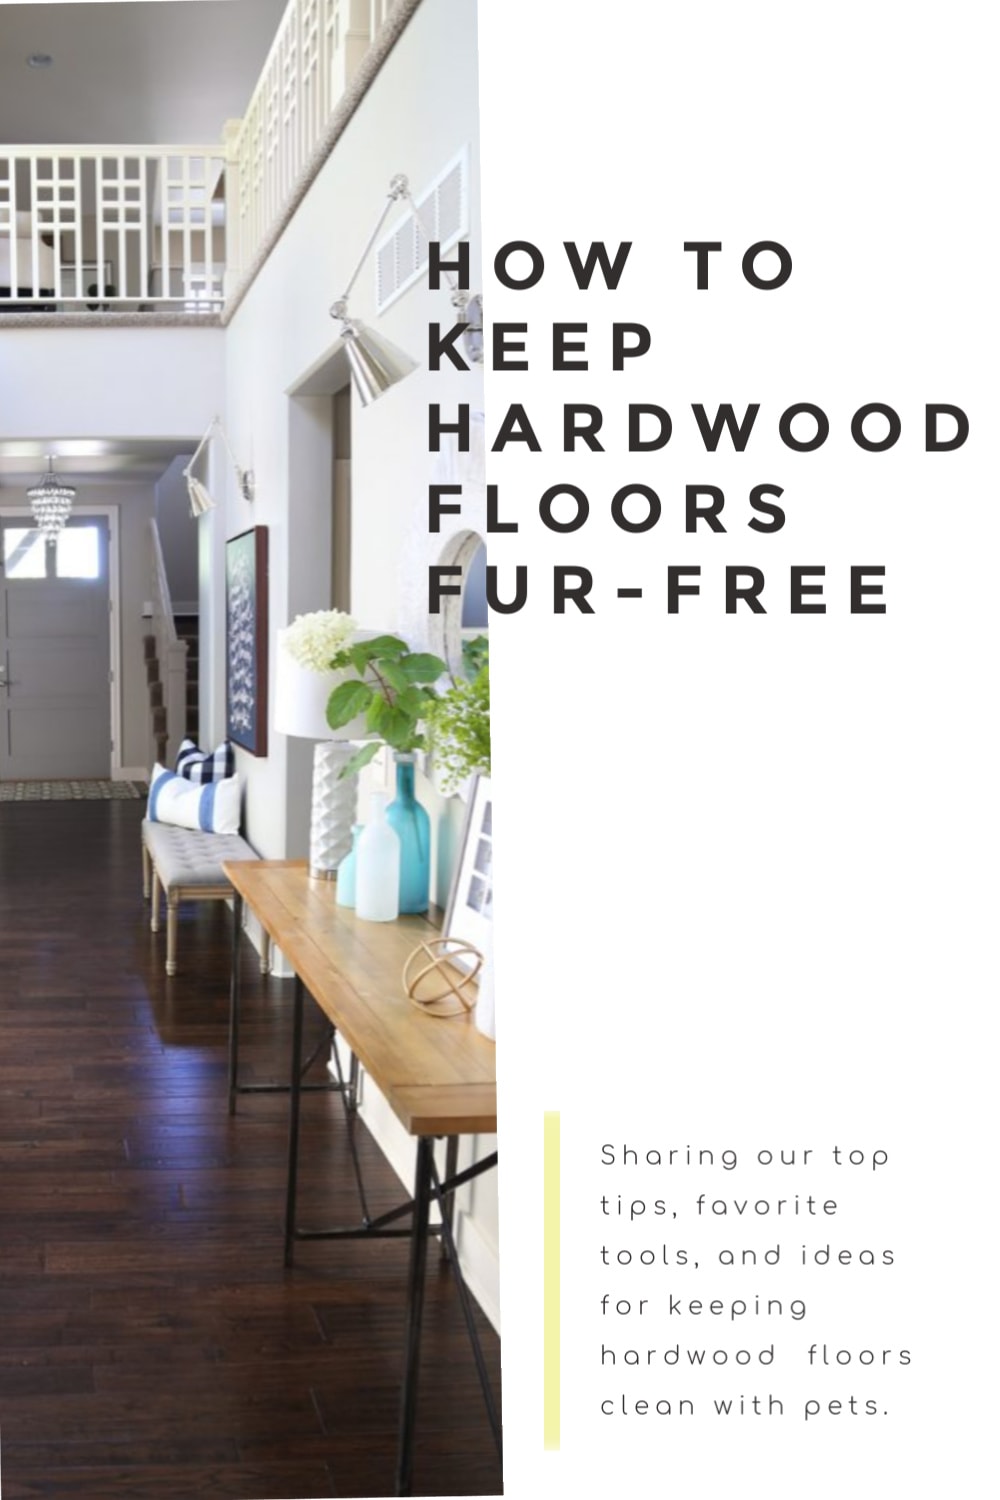 How We Keep Our Hardwood Floors Fur-Free with Four Cats